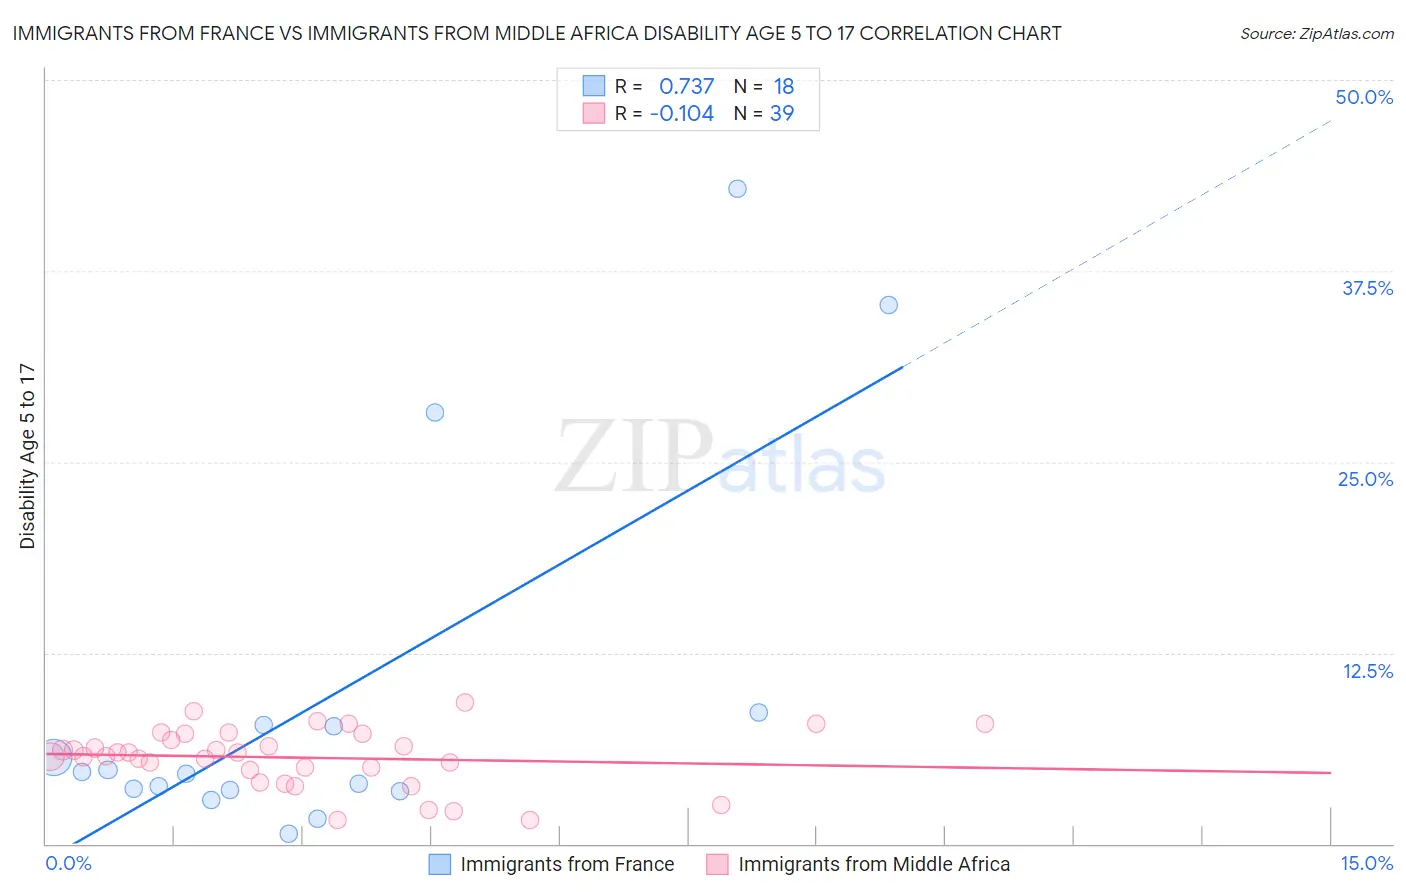 Immigrants from France vs Immigrants from Middle Africa Disability Age 5 to 17